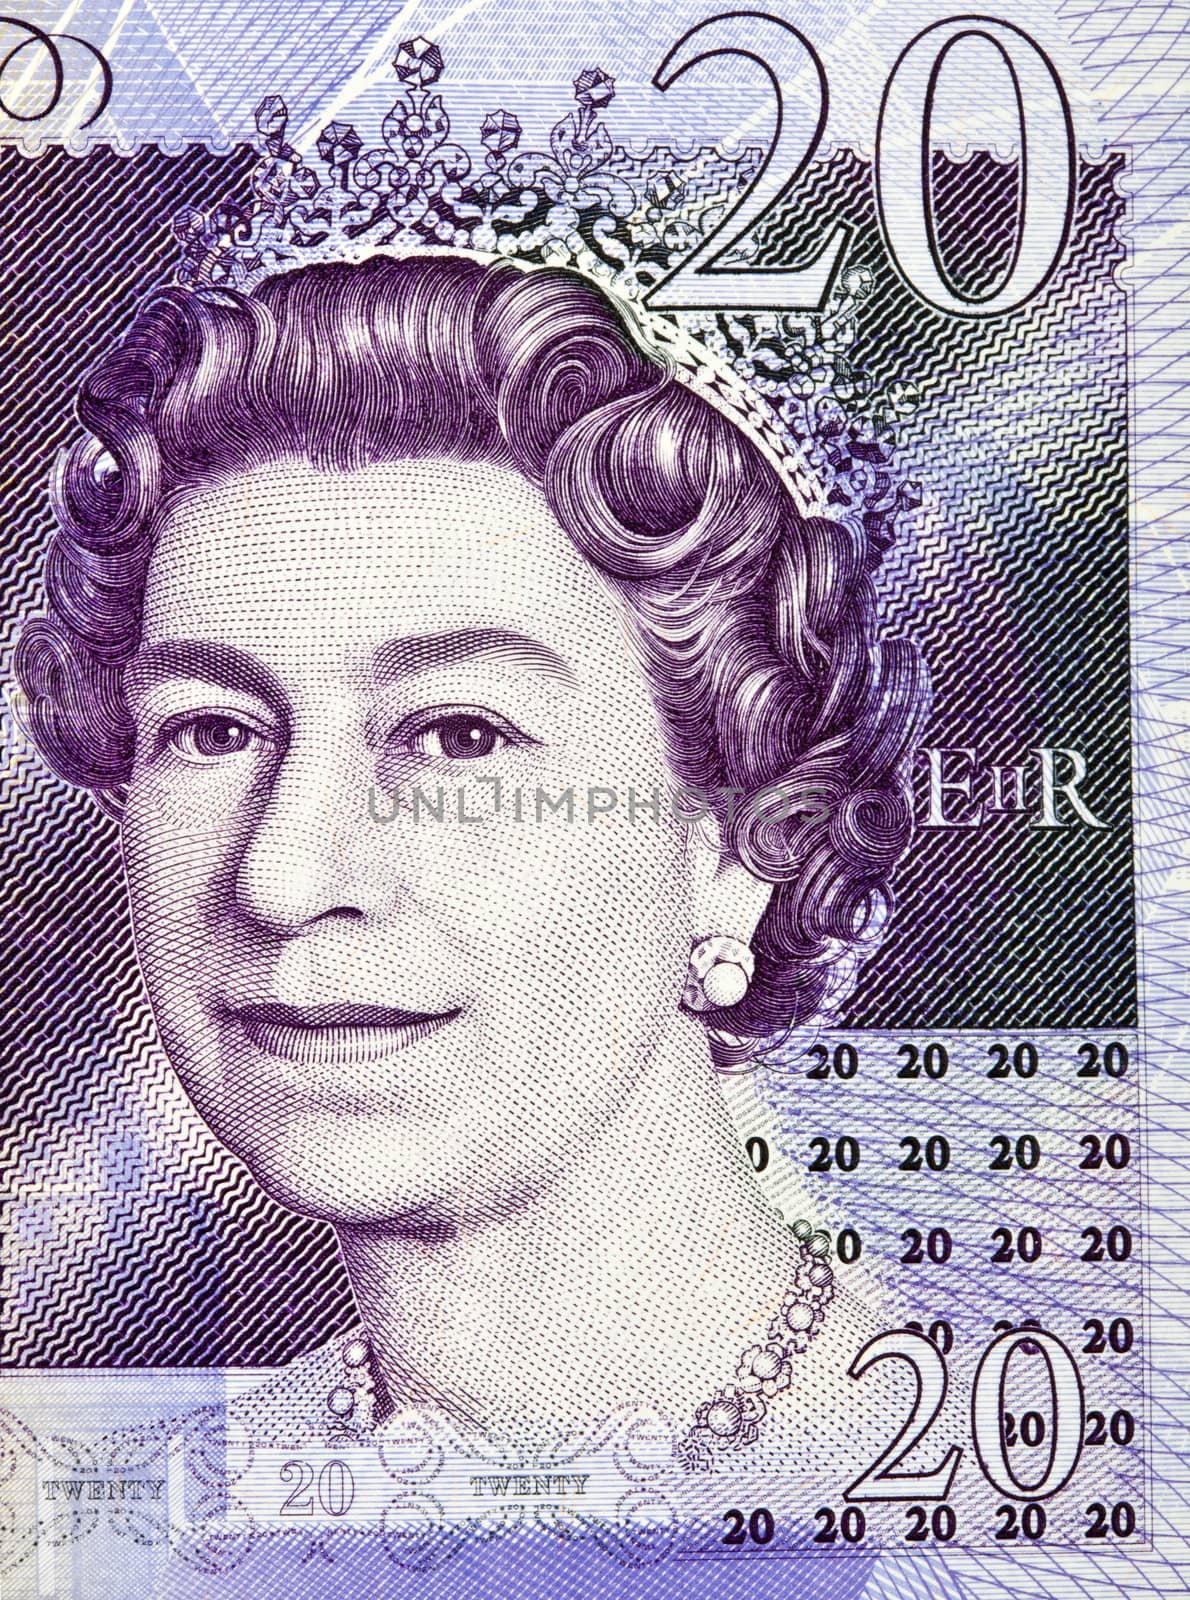 The Queens picture on the �20 English Banknote.